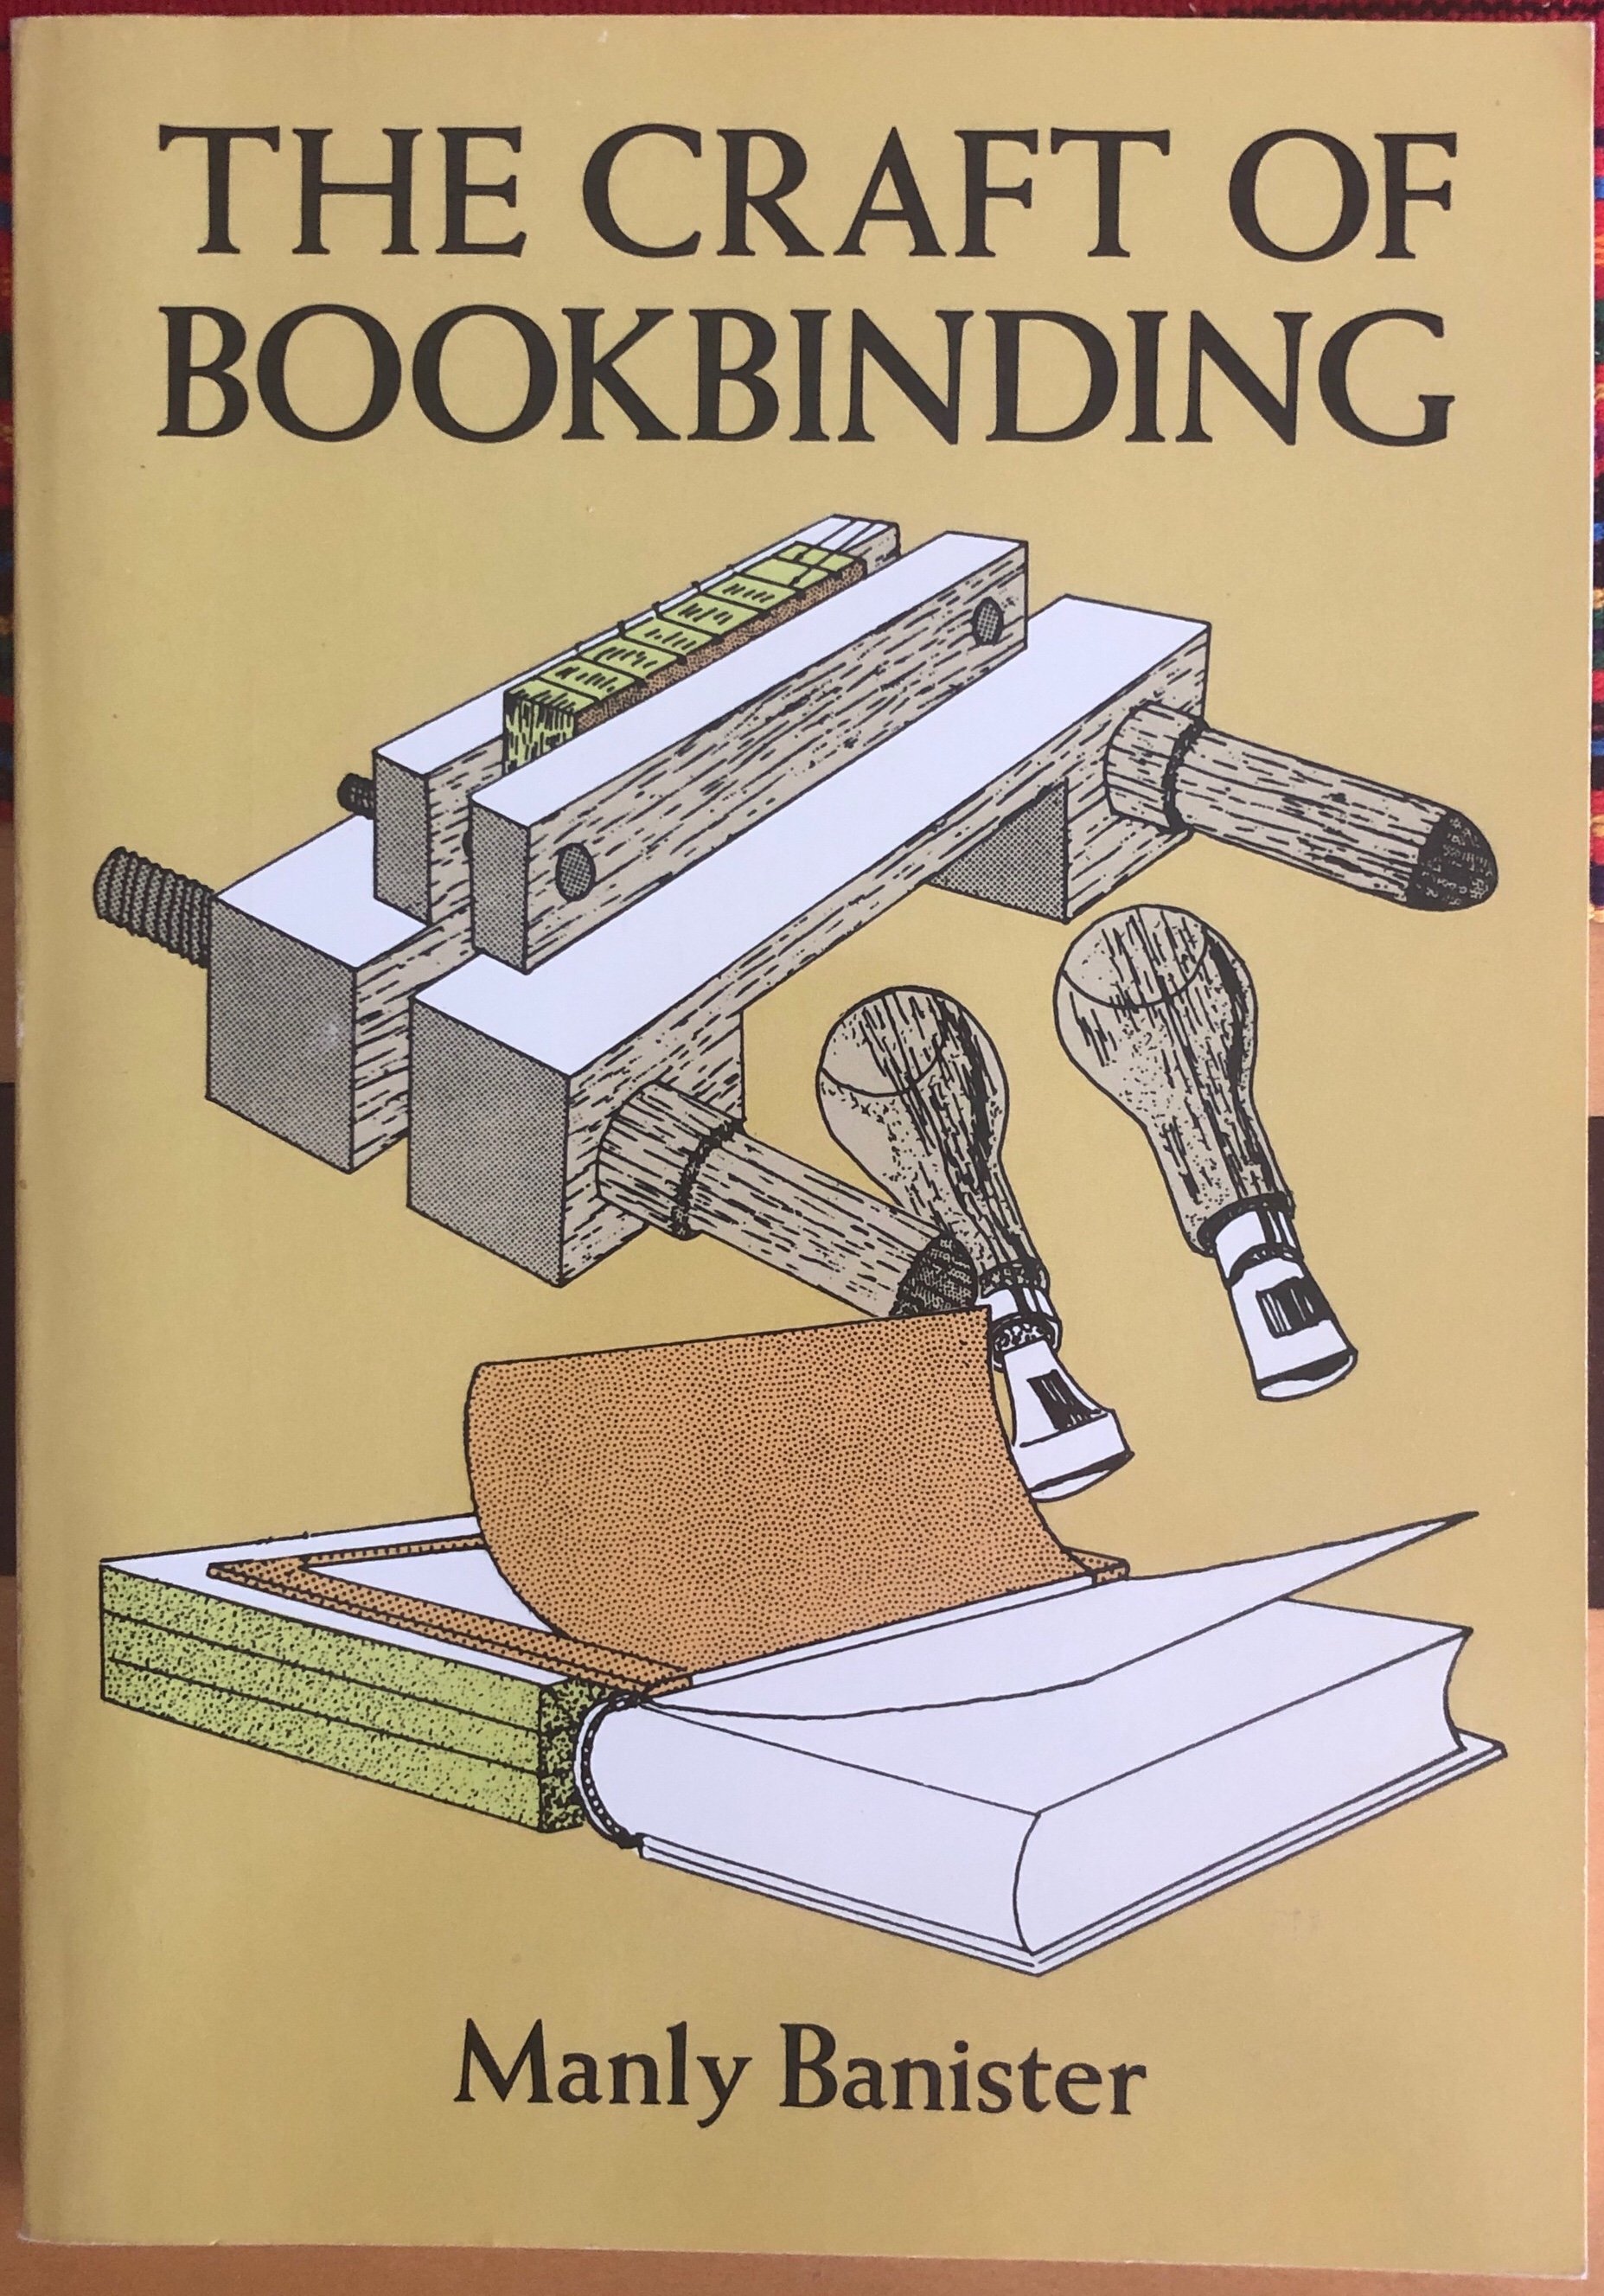 The Craft of Bookbinding textbook